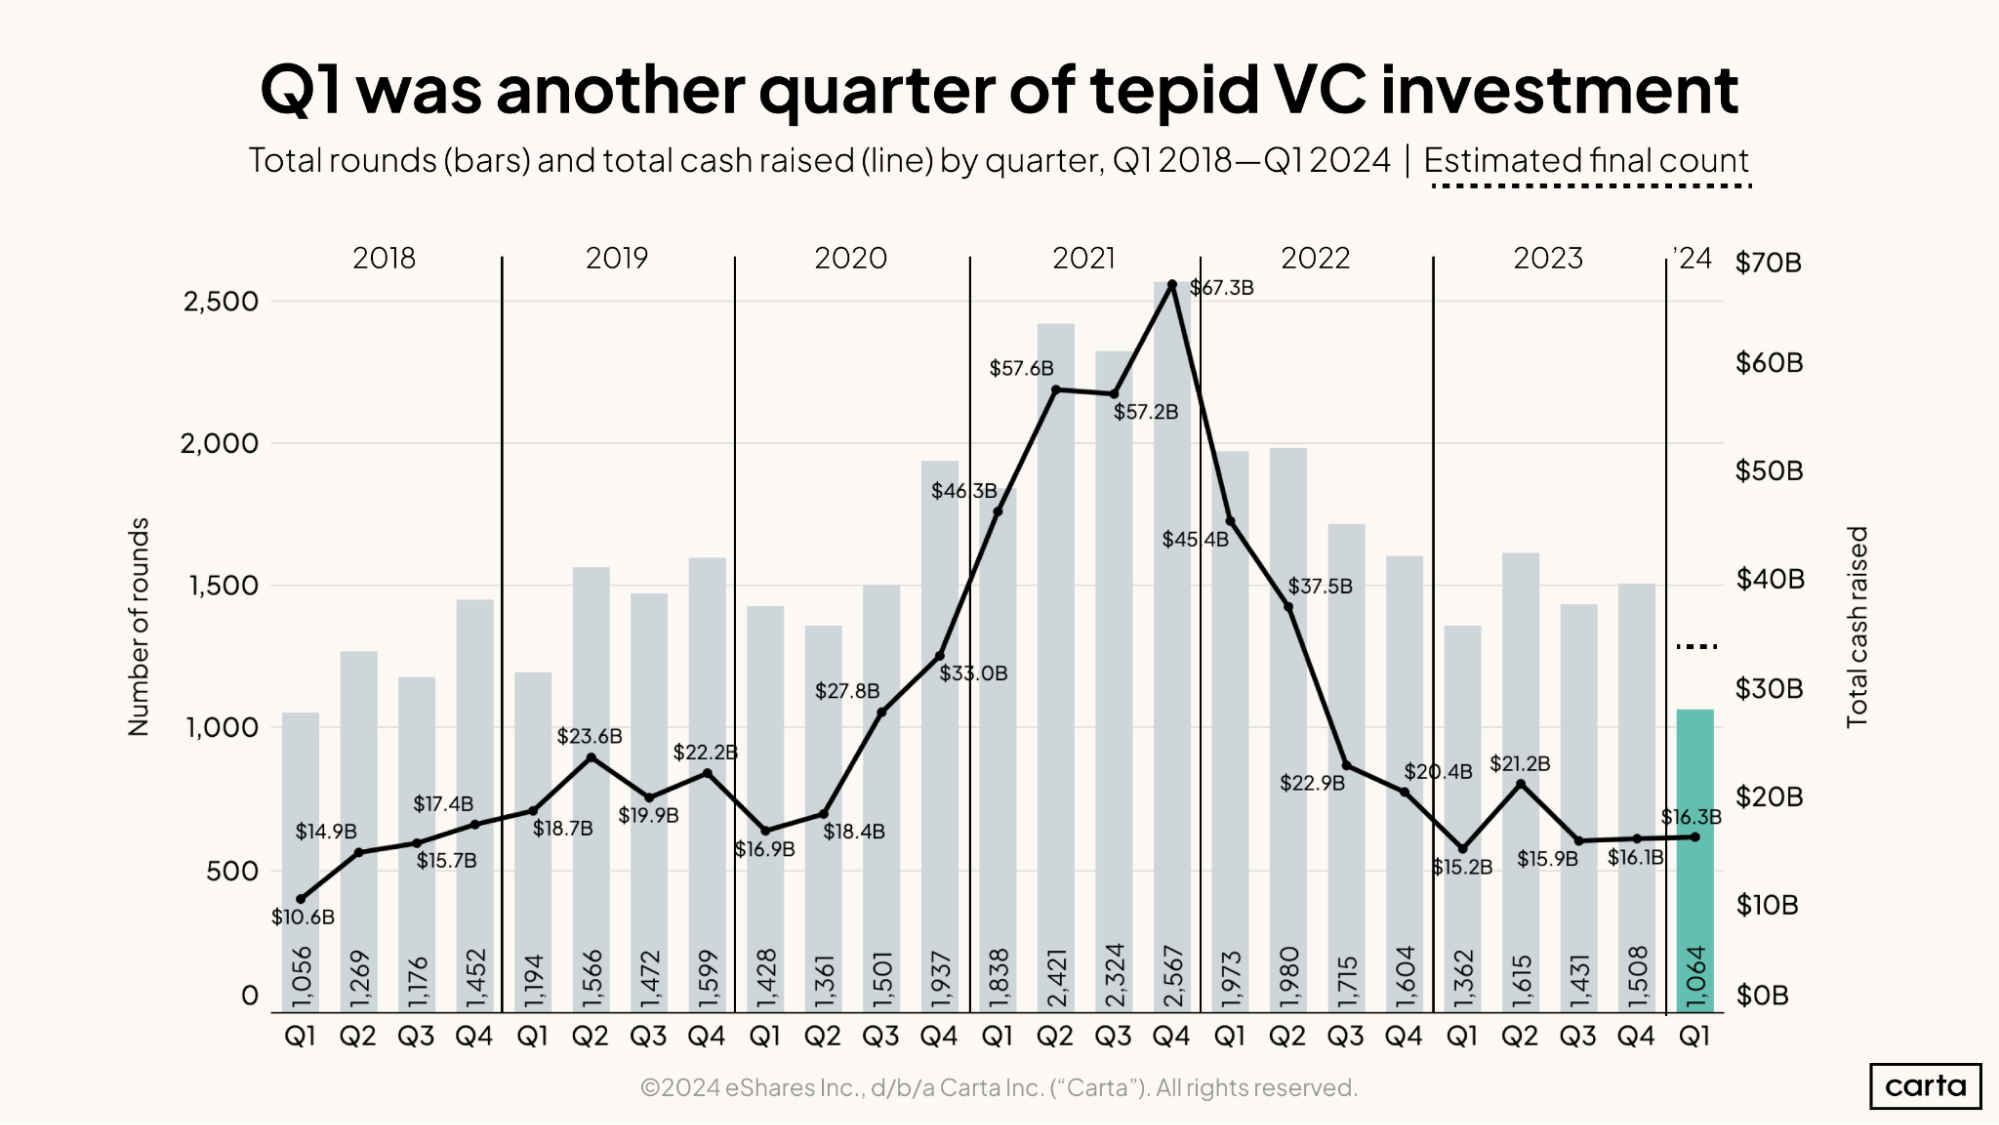 Q1 was another quarter of tepid VC investment